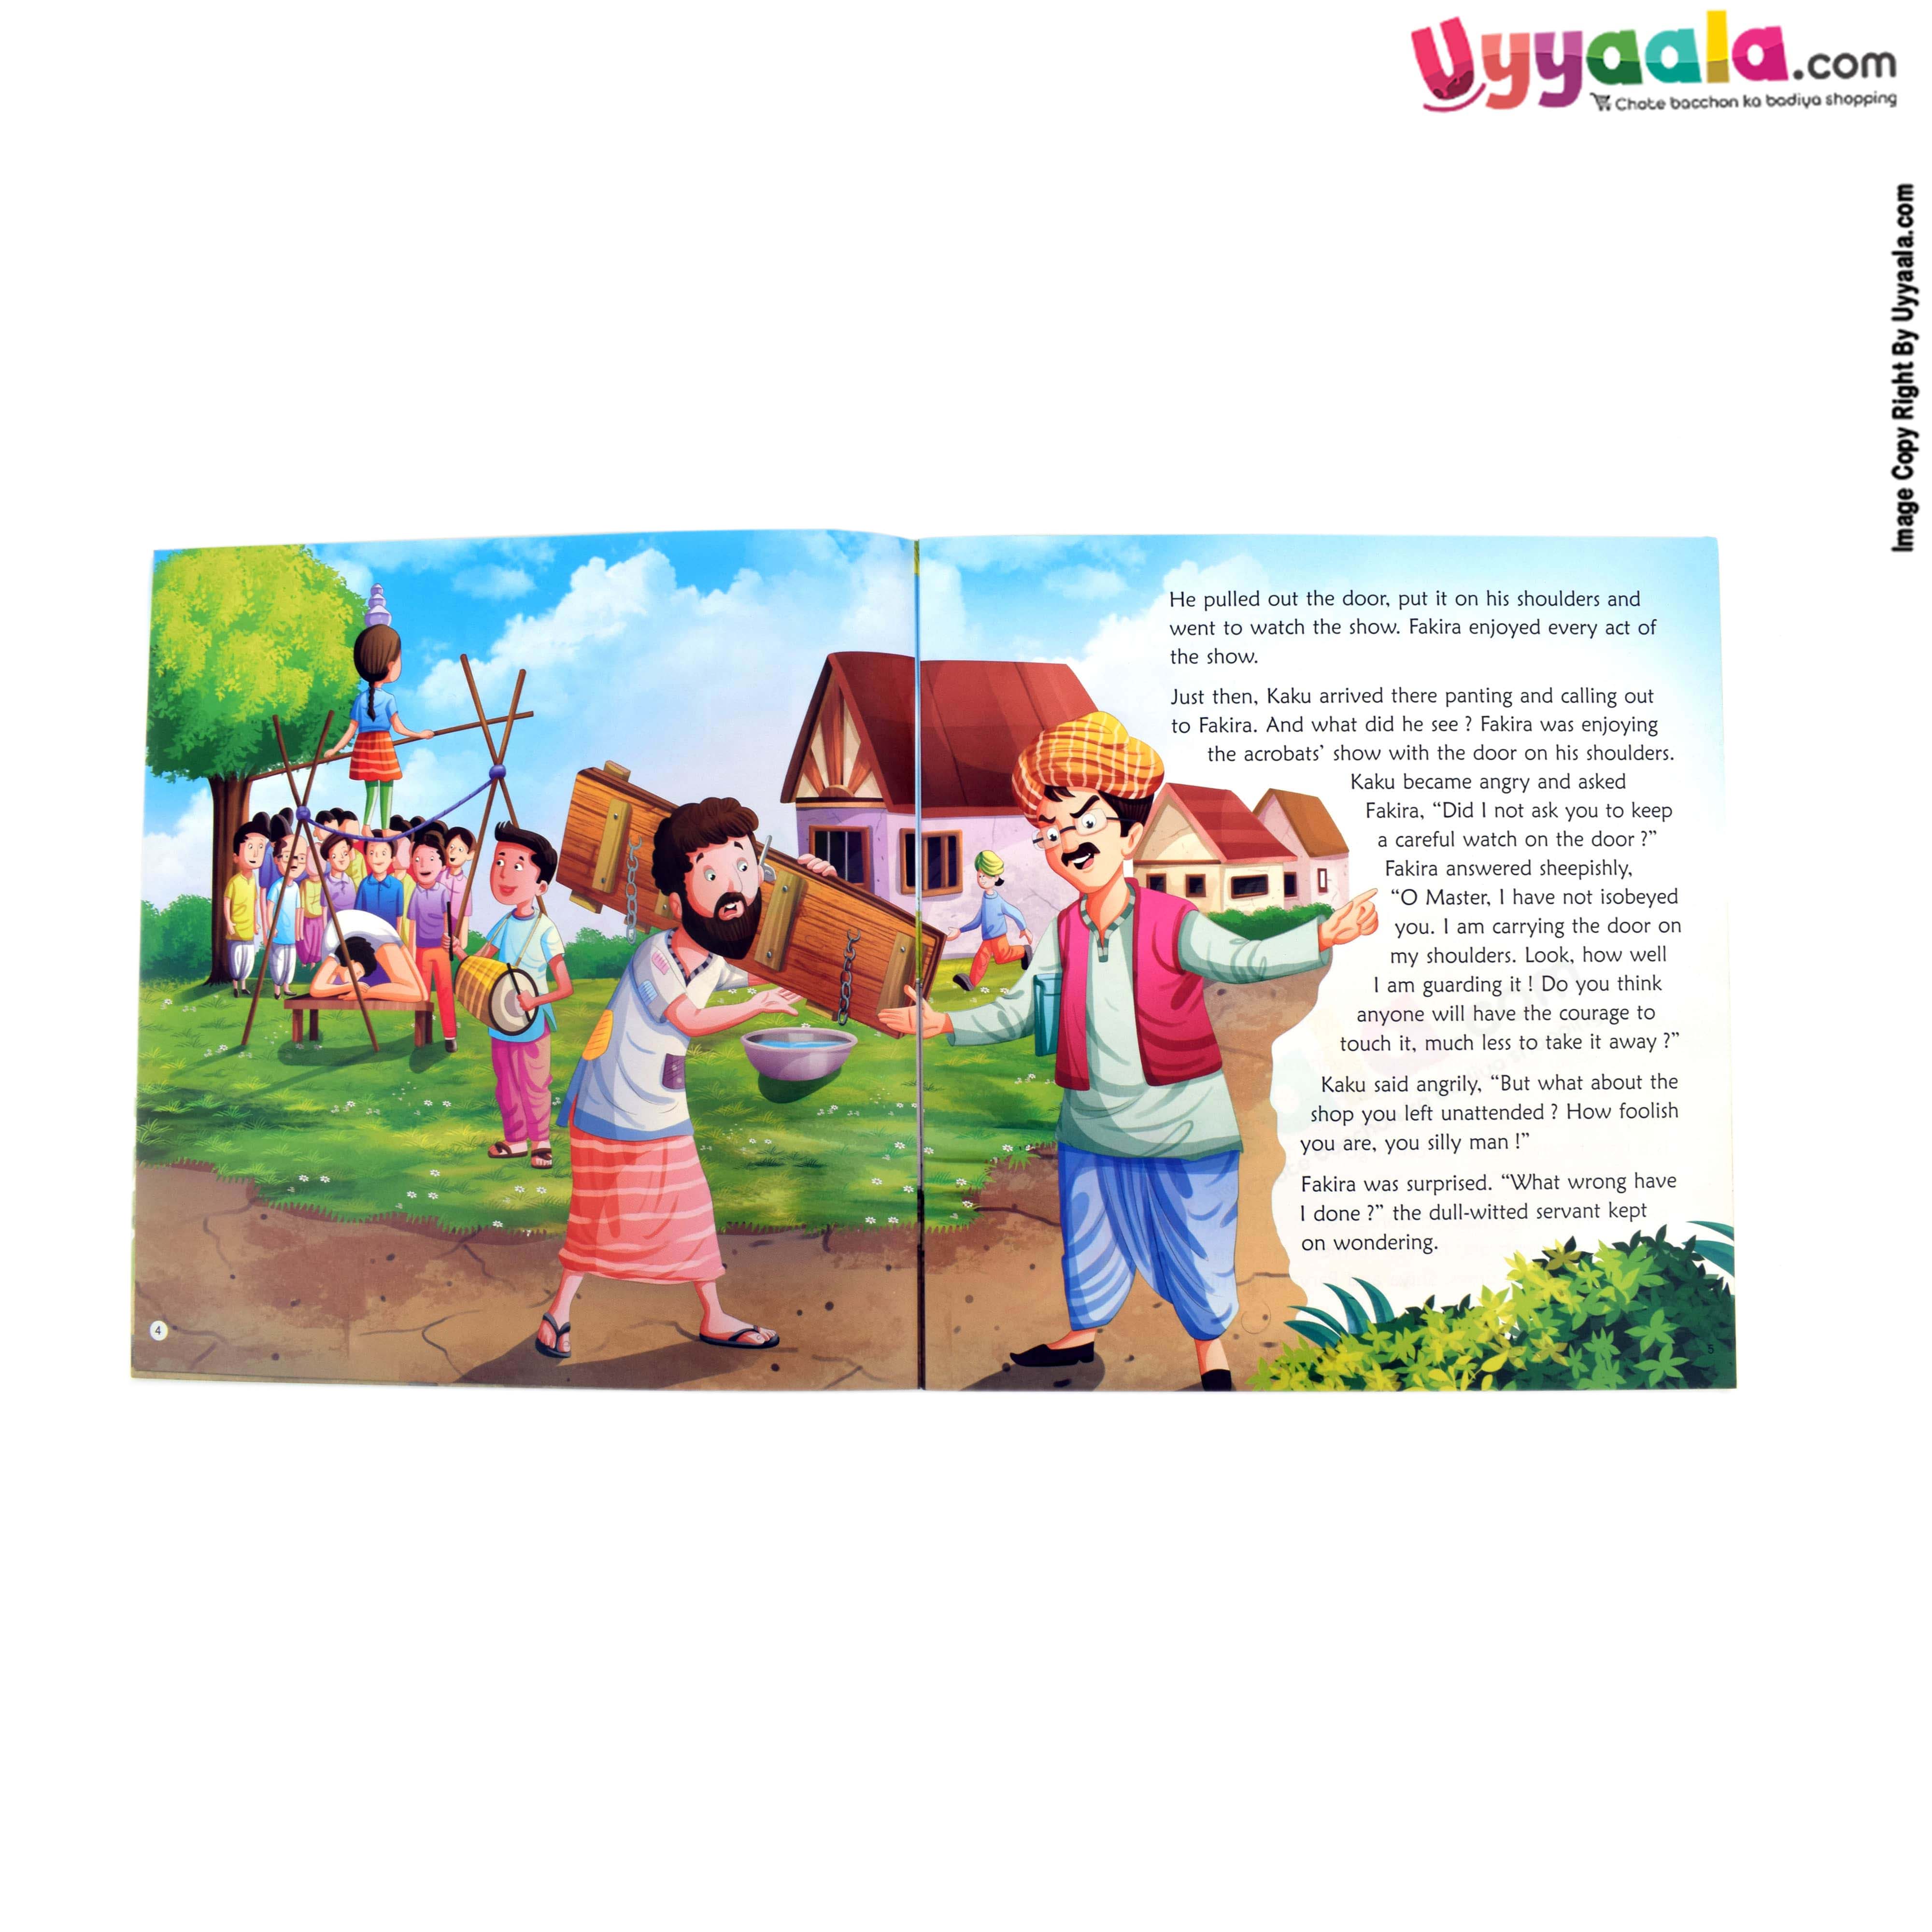 NAVNEET any time tales stories for children, once upon a time Pack of 4